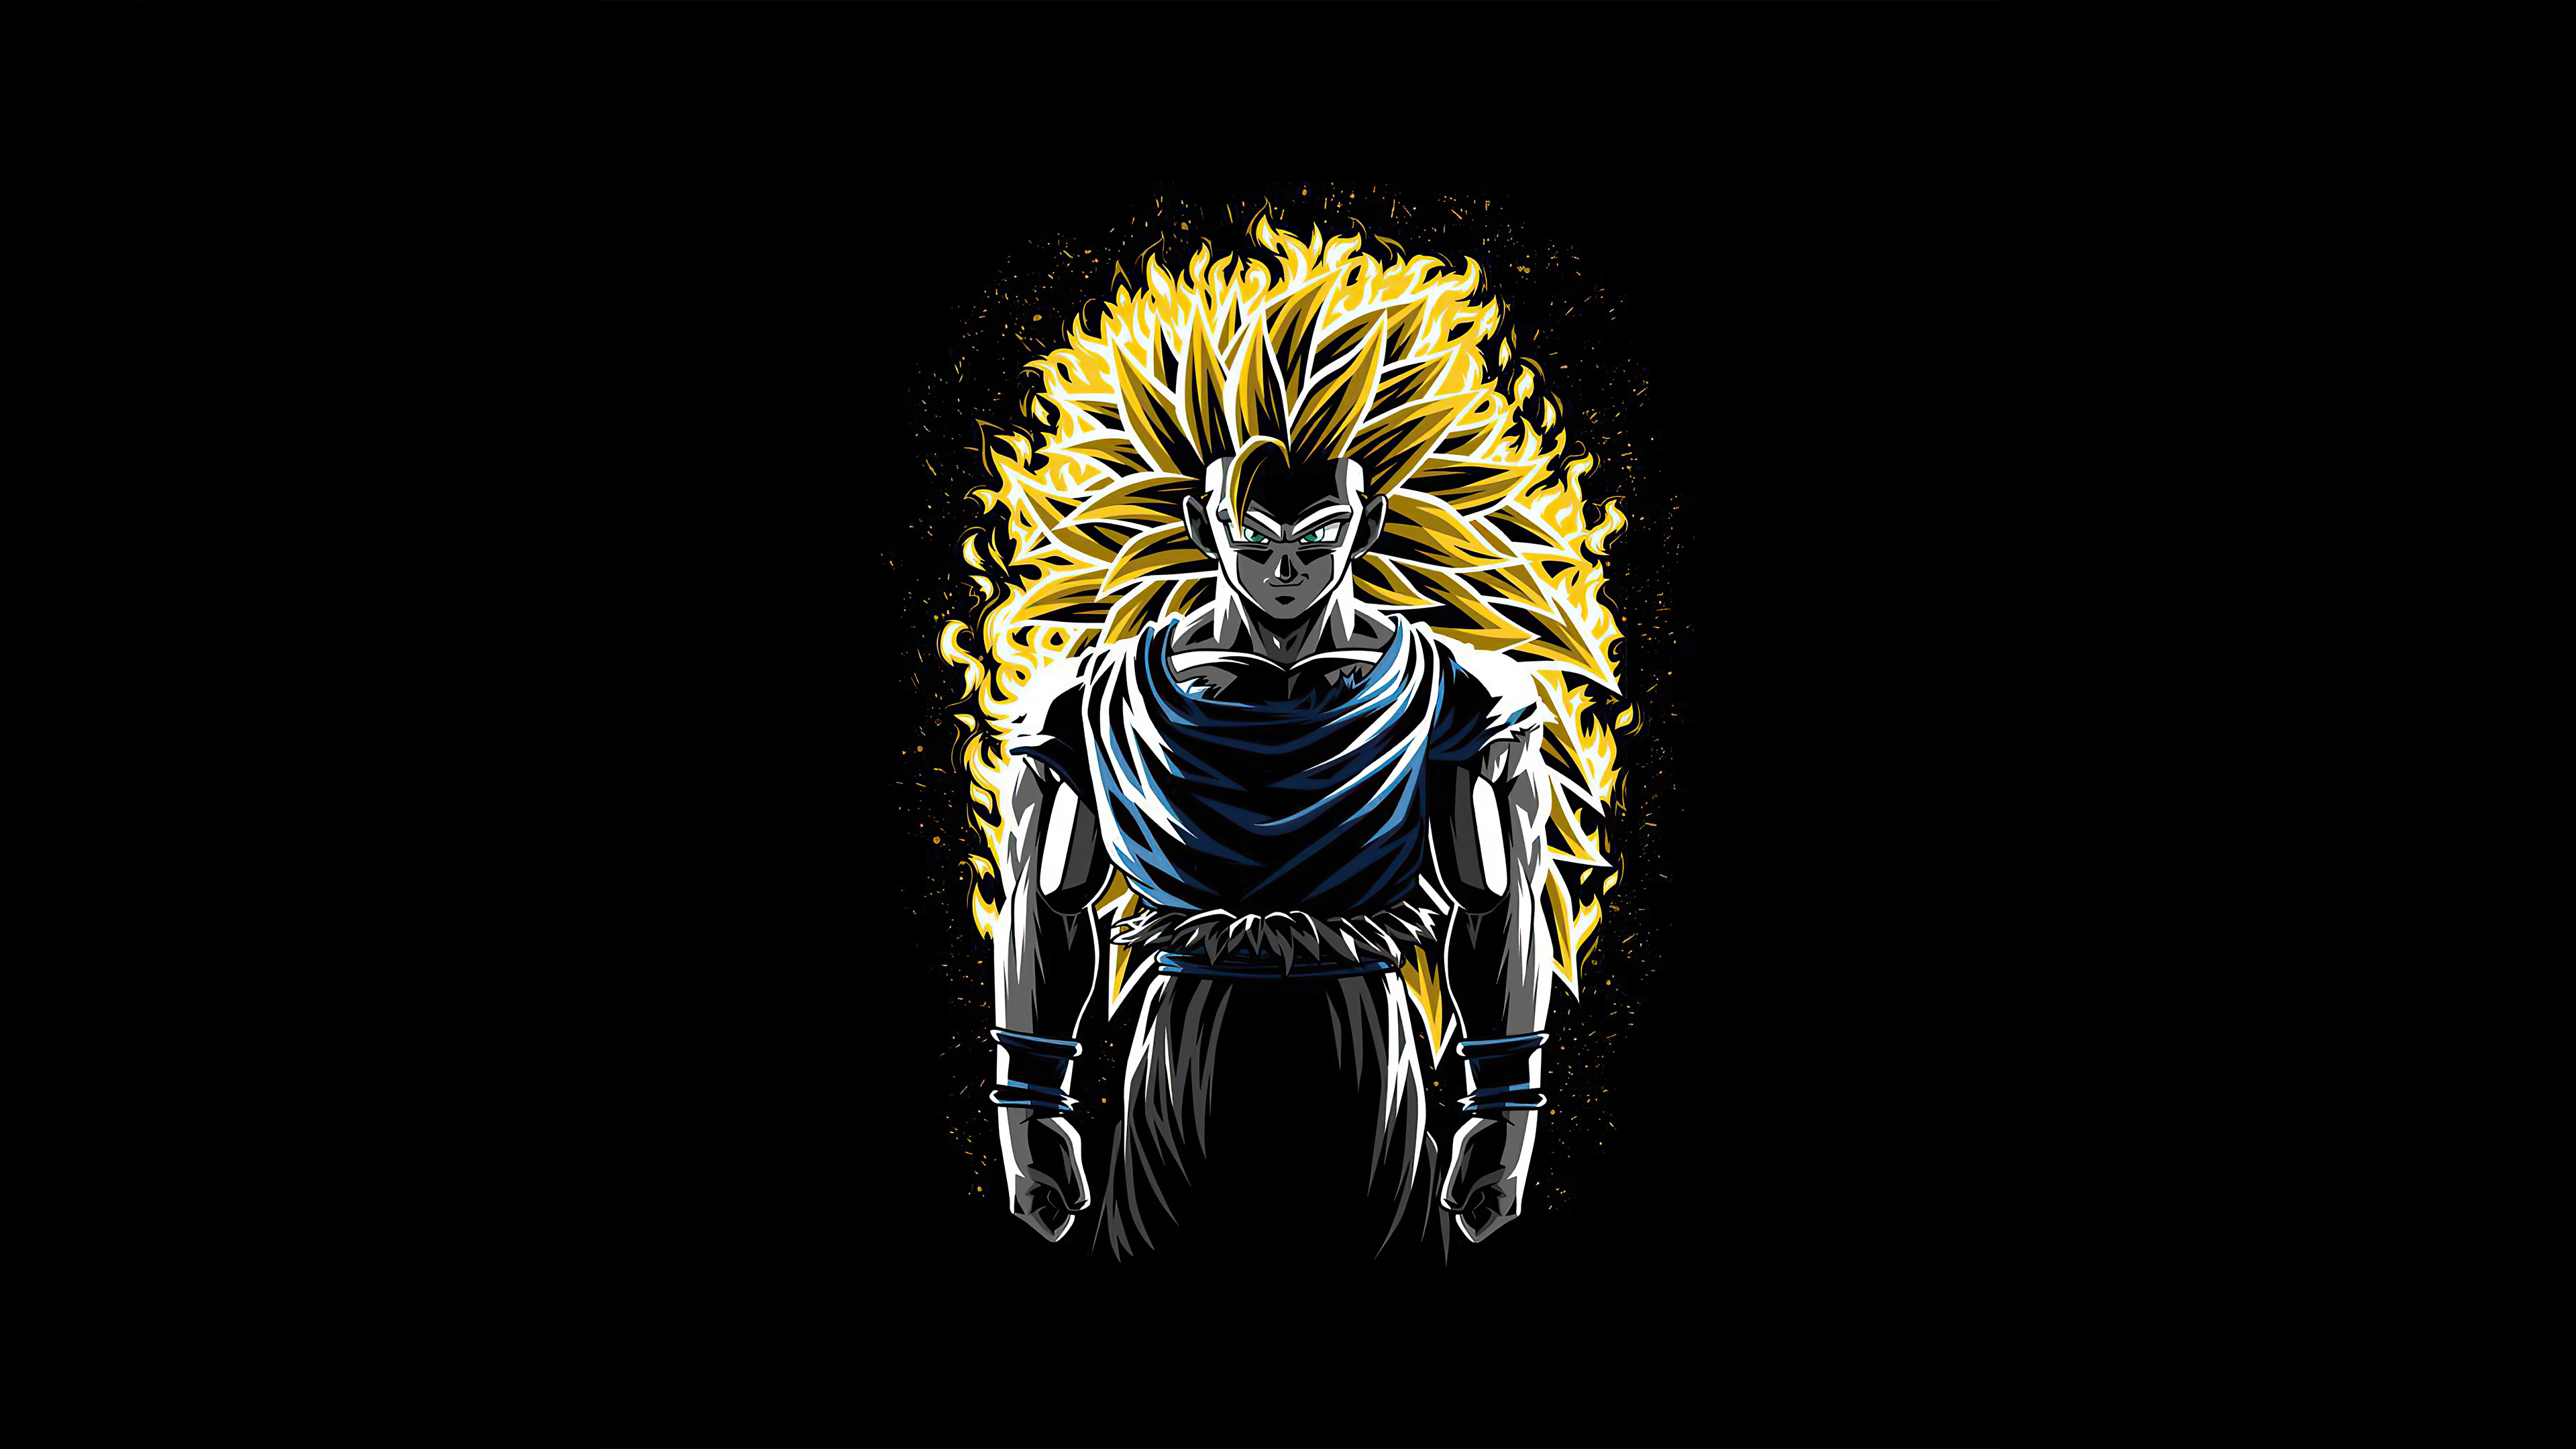 3840x2160 Battle Fire Super Saiyan 3 Goku Dragon Ball Z, HD Anime, 4k Wallpapers, Images, Backgrounds, Photos and Pictures